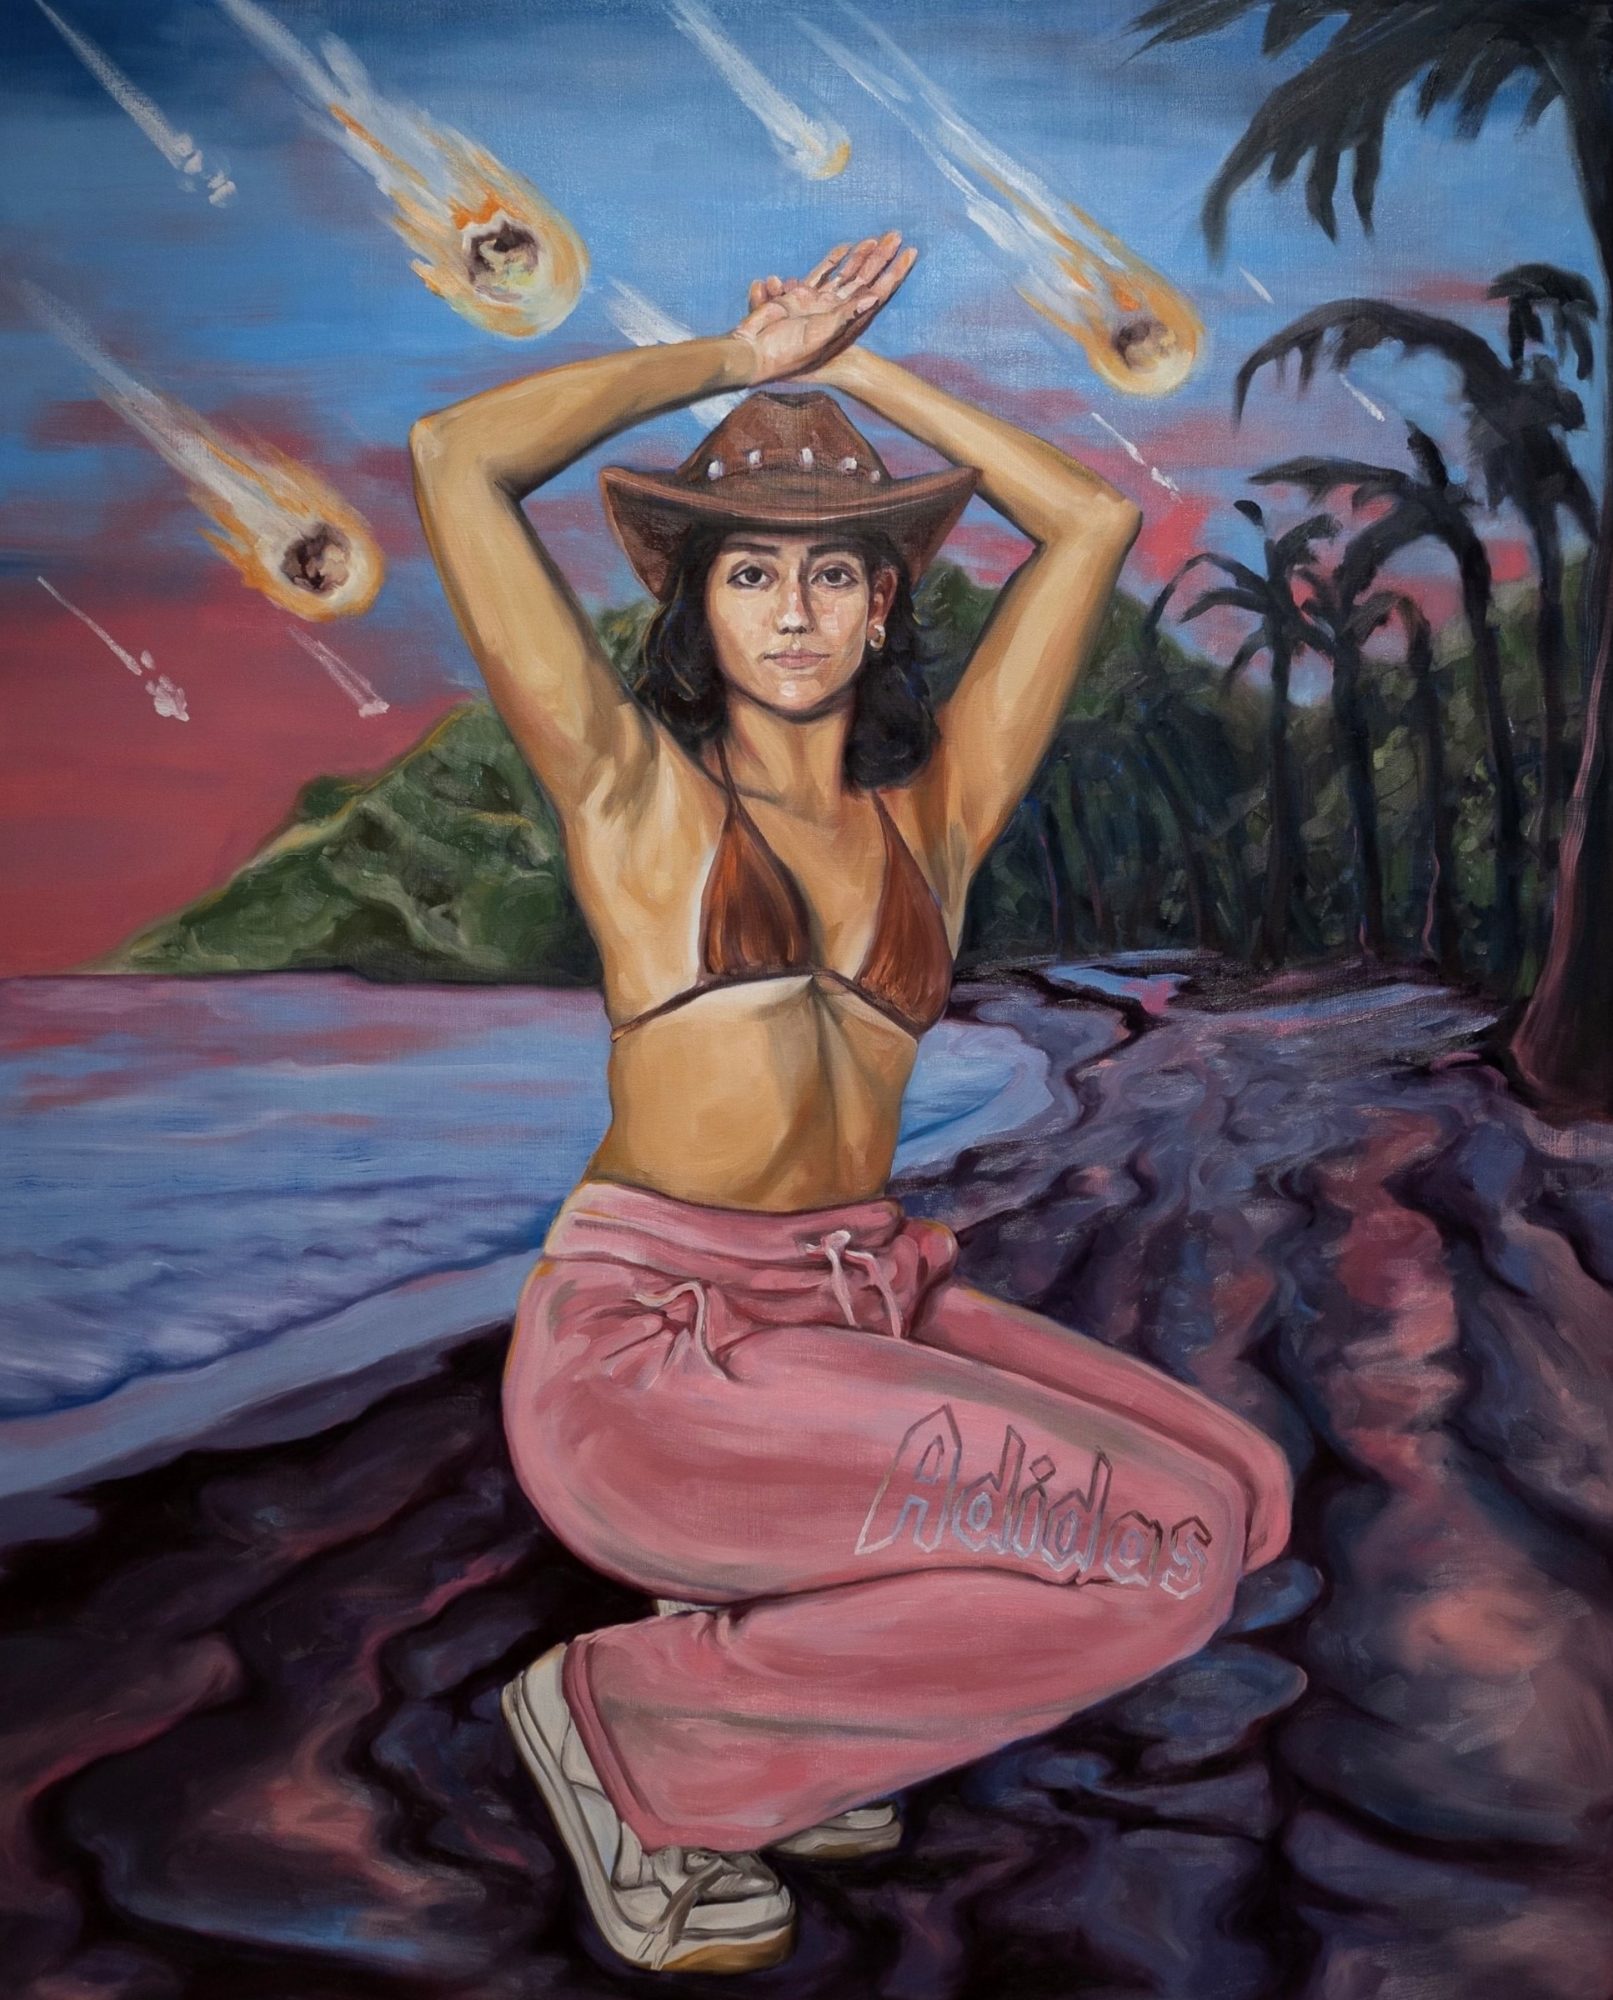 Image of a painting of a woman who poses on a beach; behind her a cluster of meteors barrel towards the tropical setting